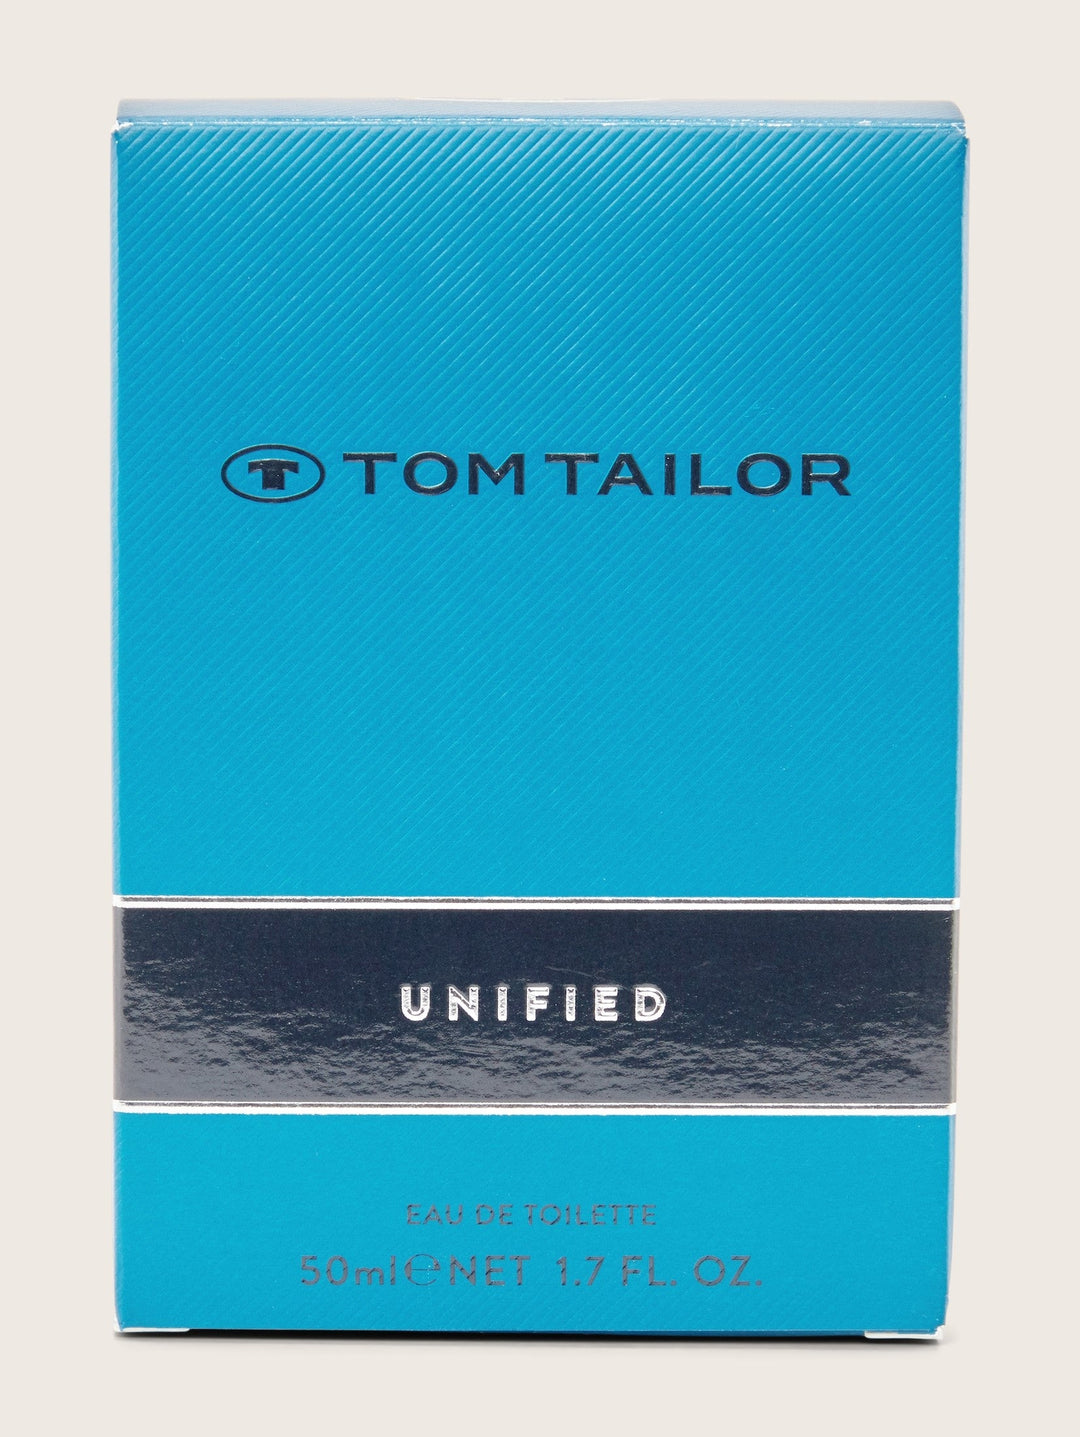 Square EDT UNIFIED 50ML TOM TAILOR – MAN Deal